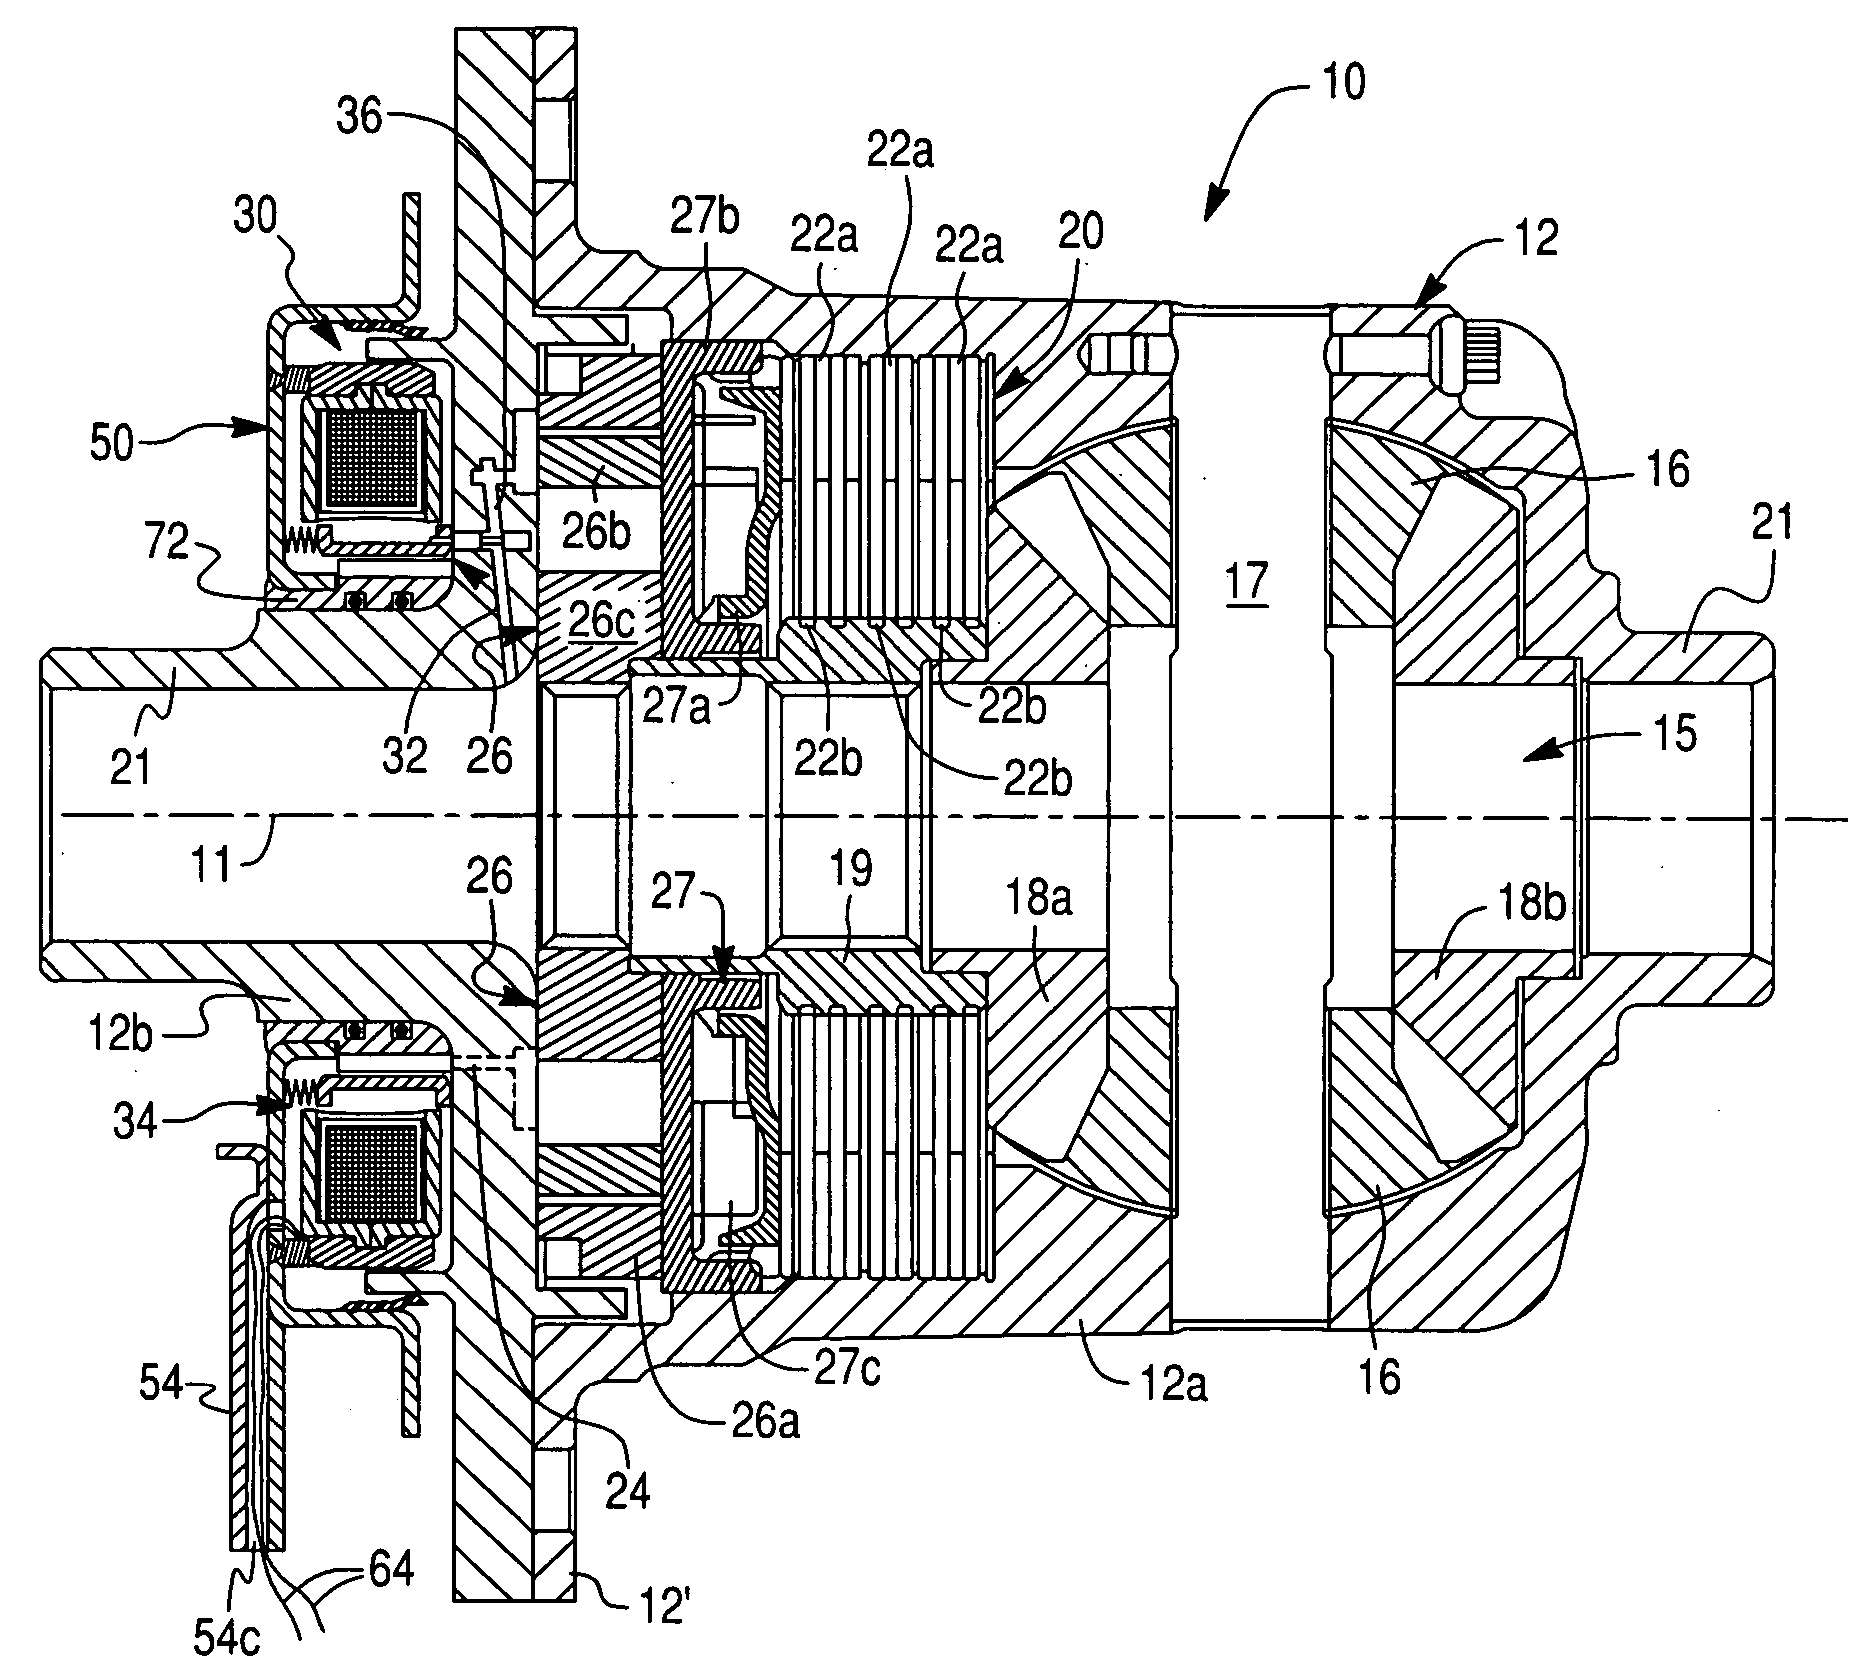 Electro-magnetic actuator for torque coupling with variable pressure-control spool valve